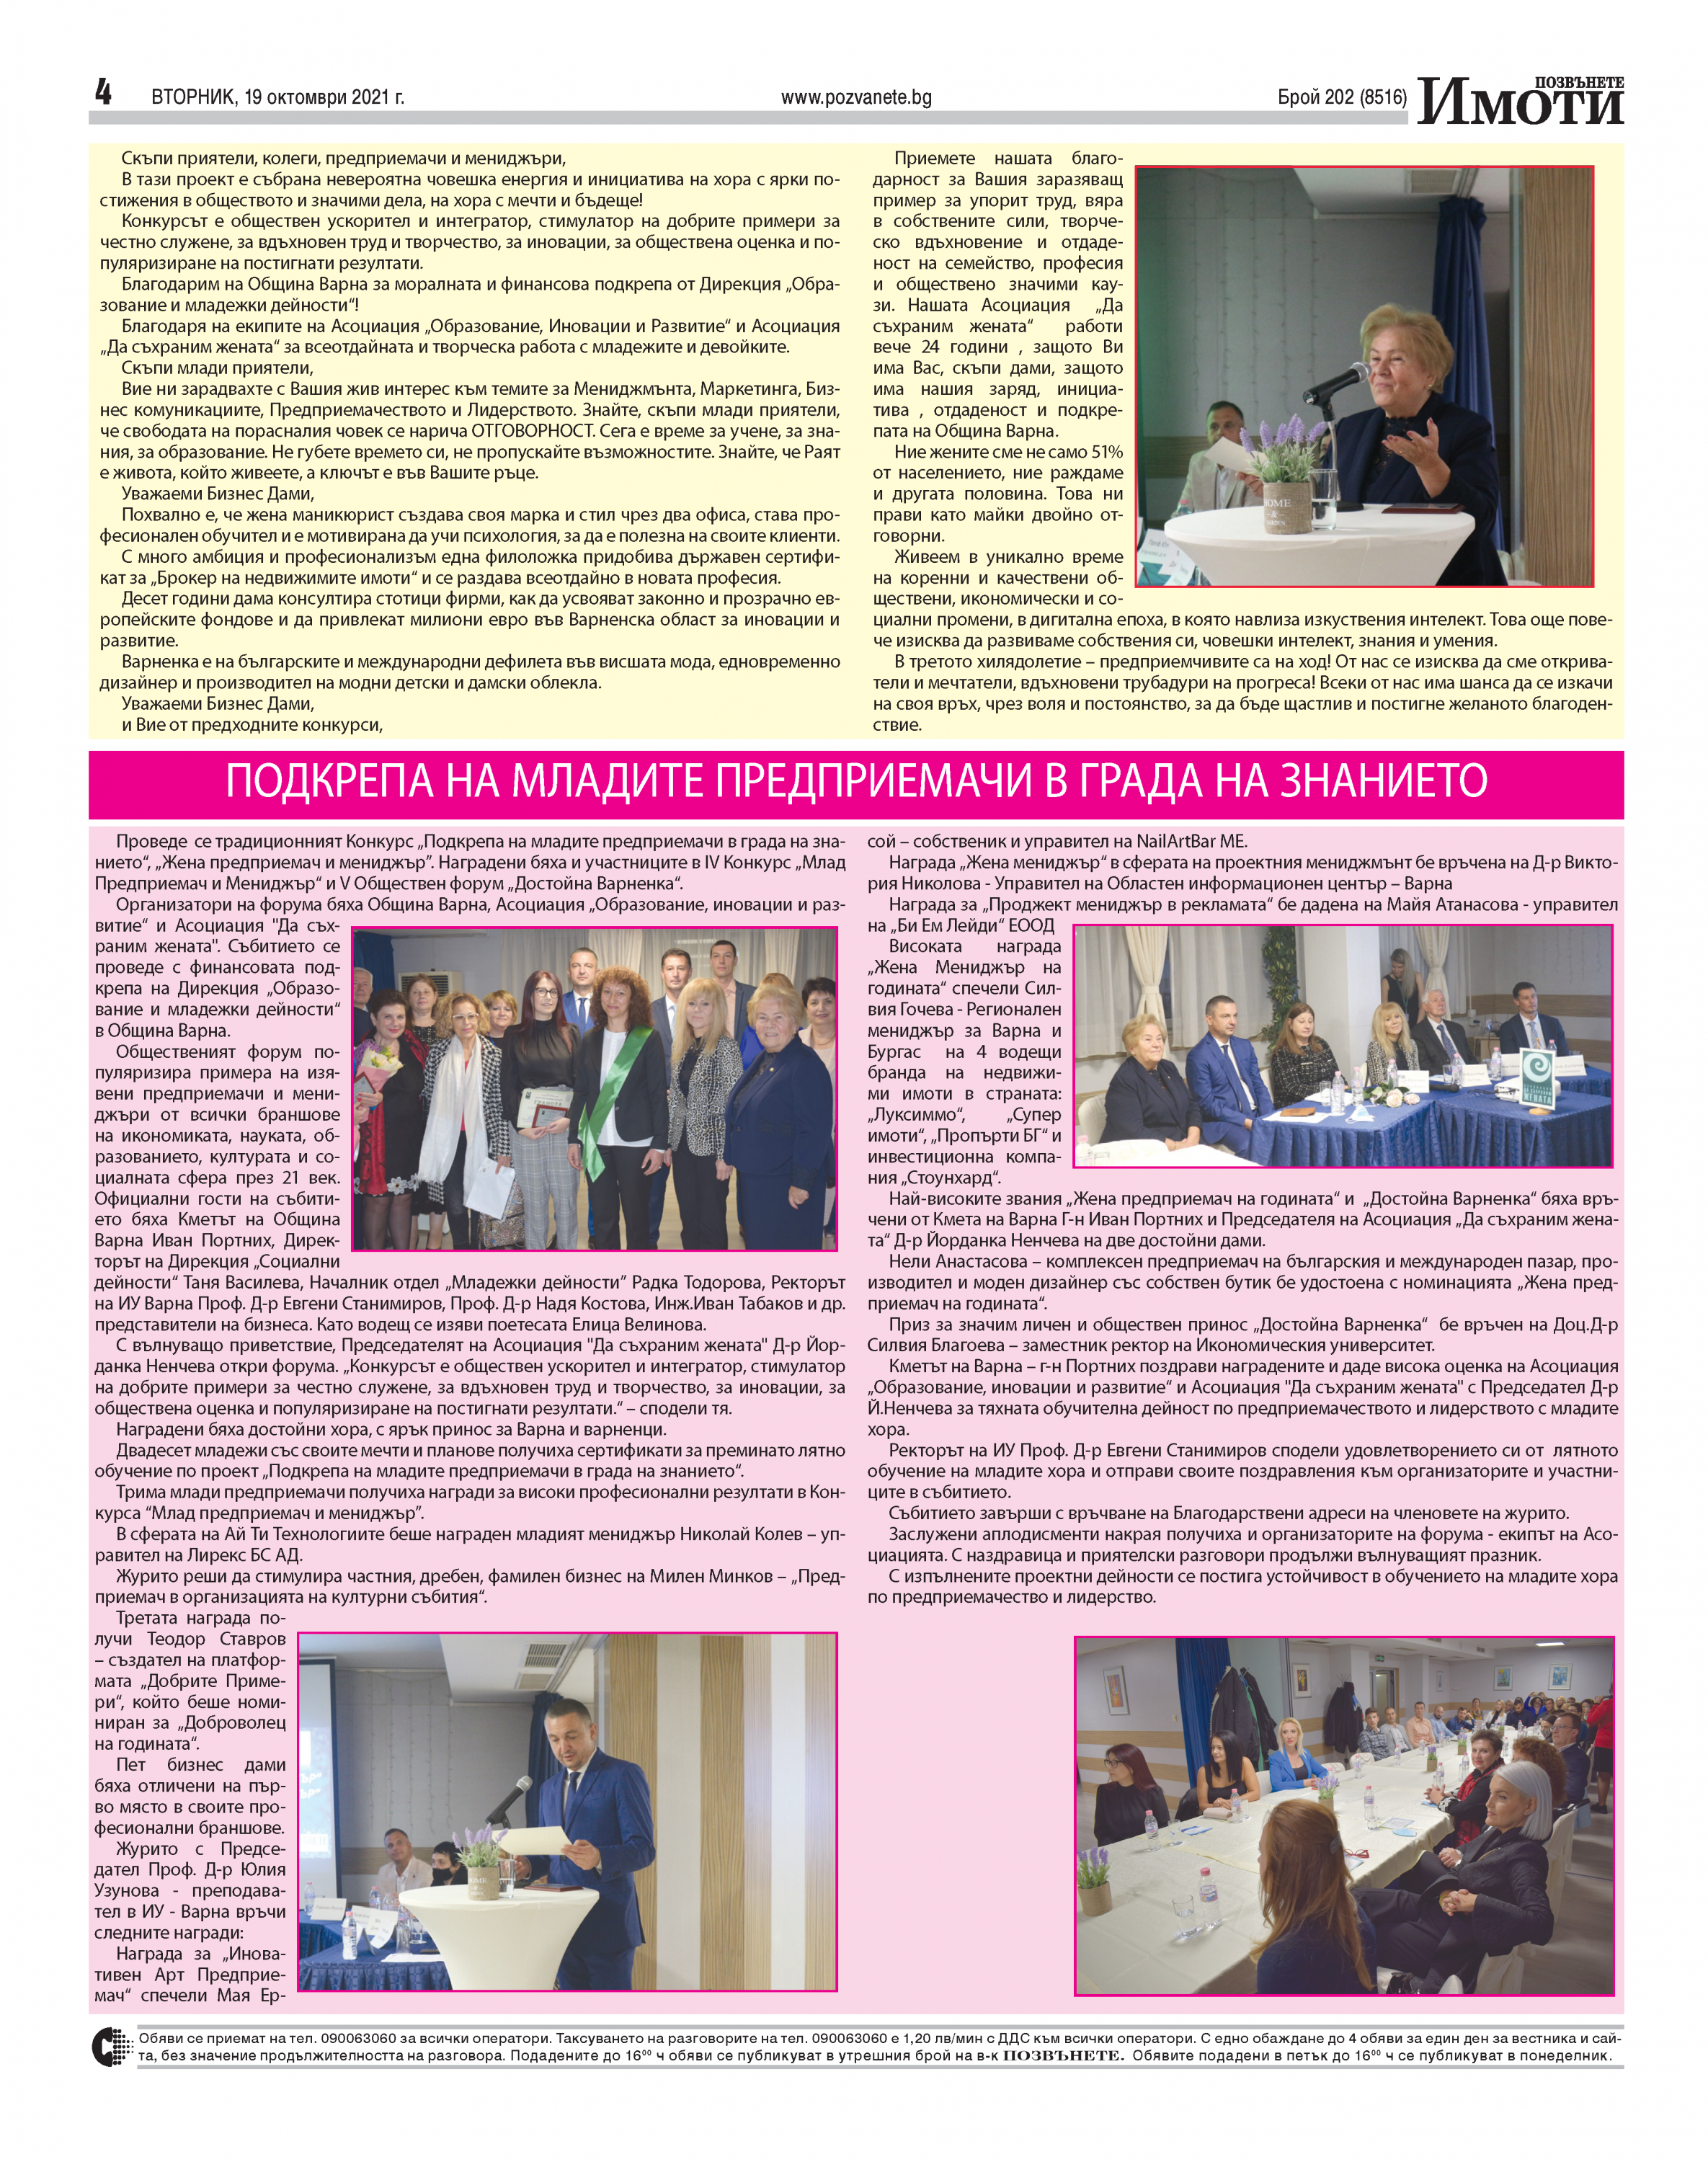 Pages-from-pozvanete-varna-2021-10-19.pdf